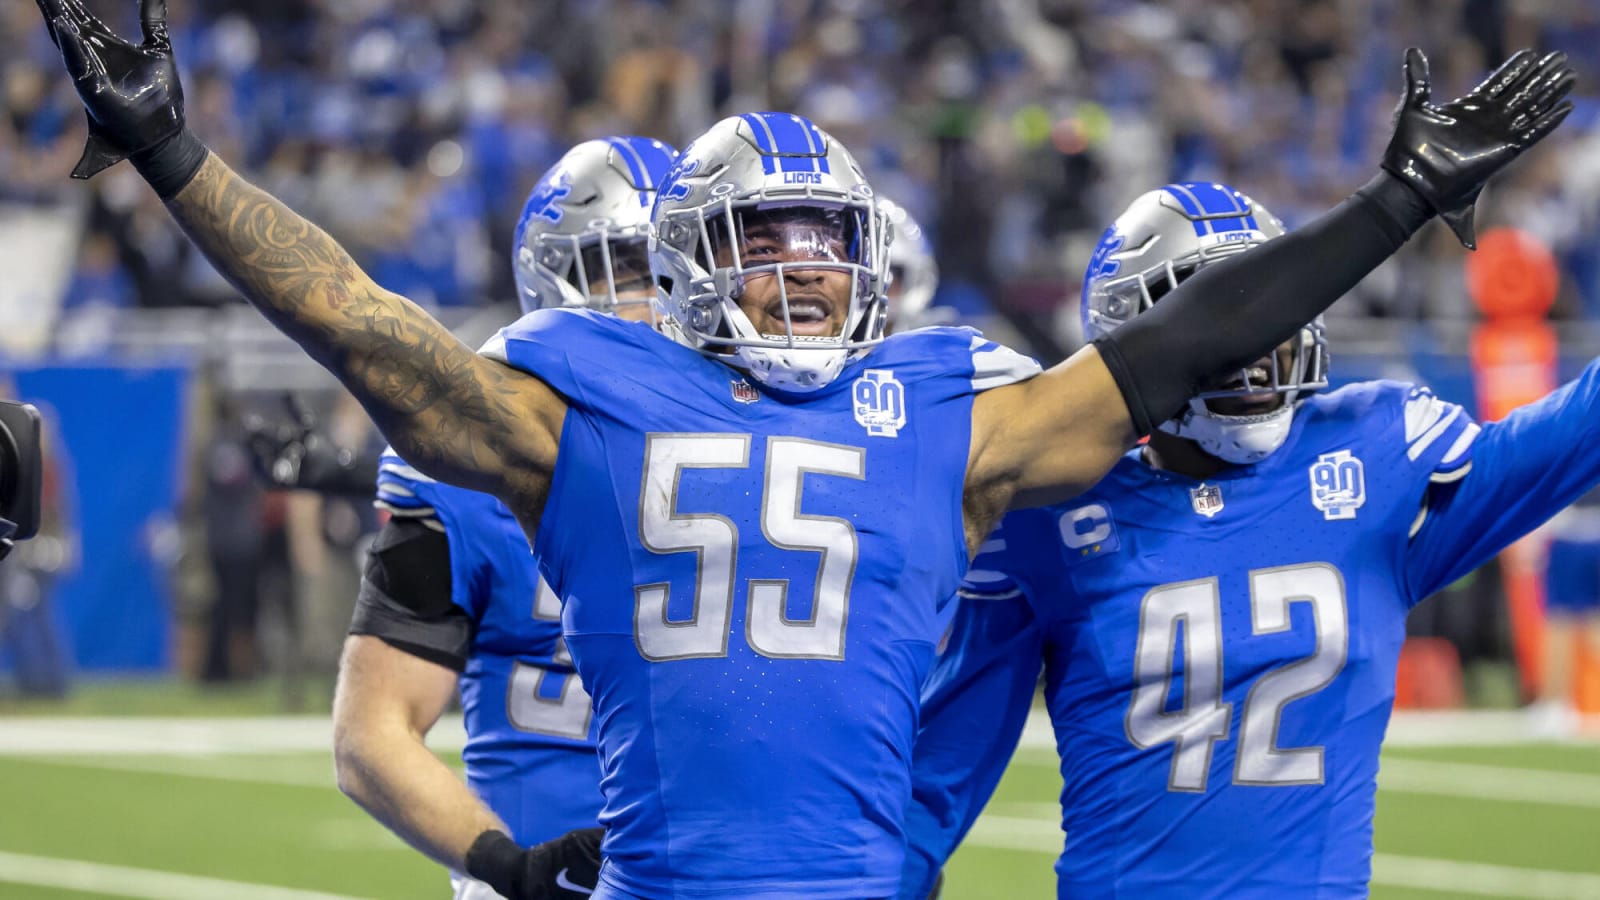 Watch: ‘Pumped up’ Lions LB coach tells Derrick Barnes he’s the reason the Lions will play the NFC Championship Game following decisive interception against the Buccaneers